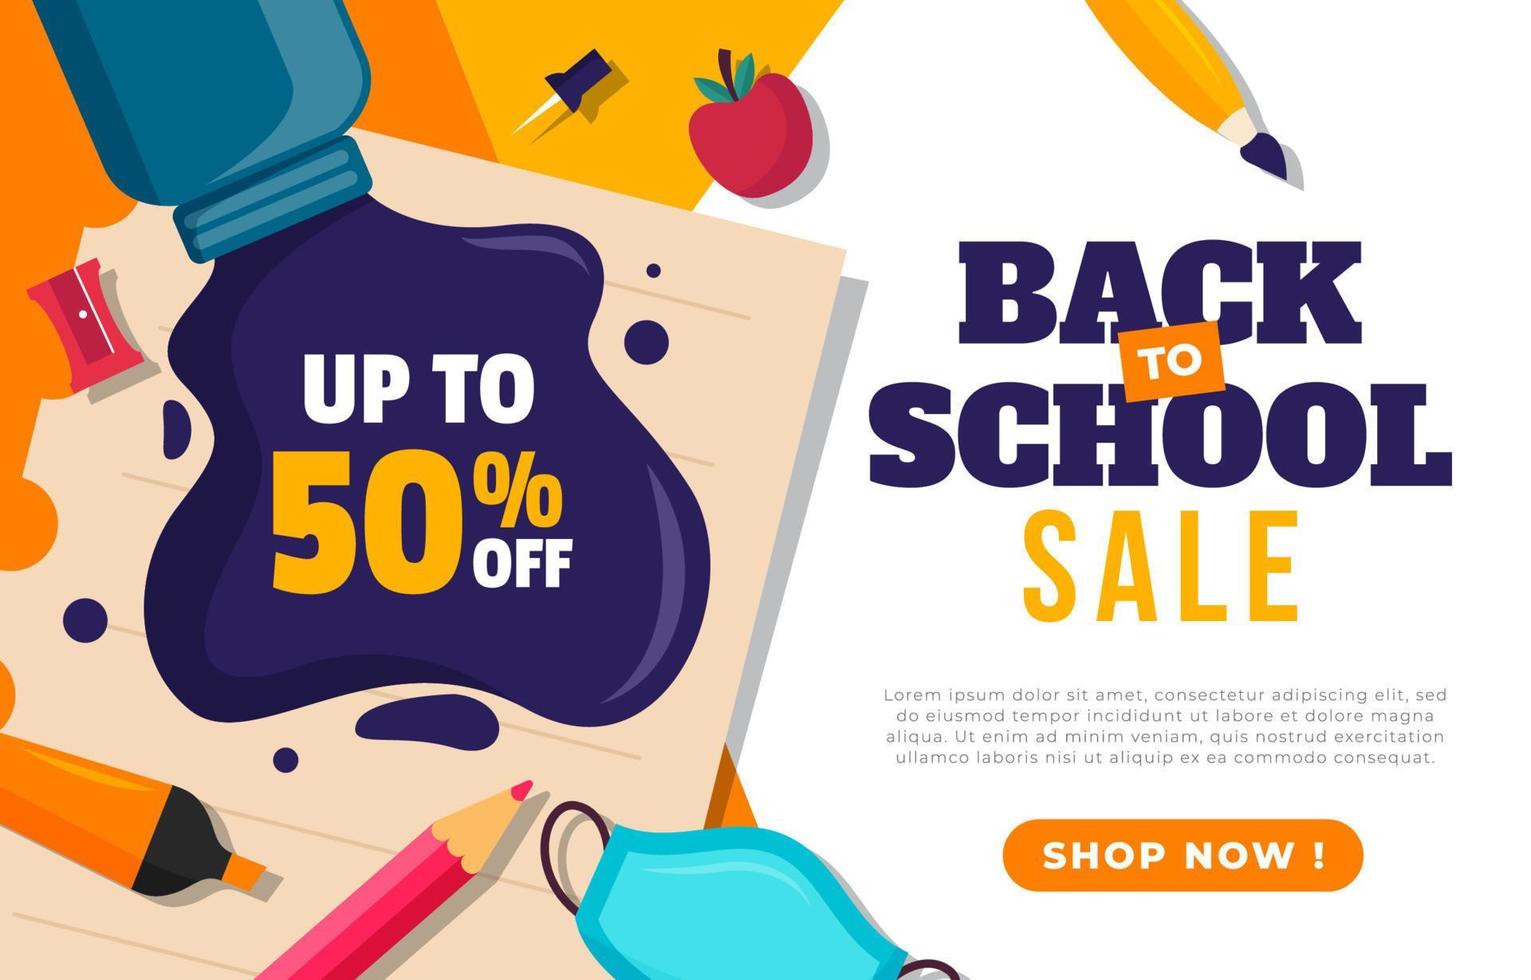 Back to School Sale Poster vector